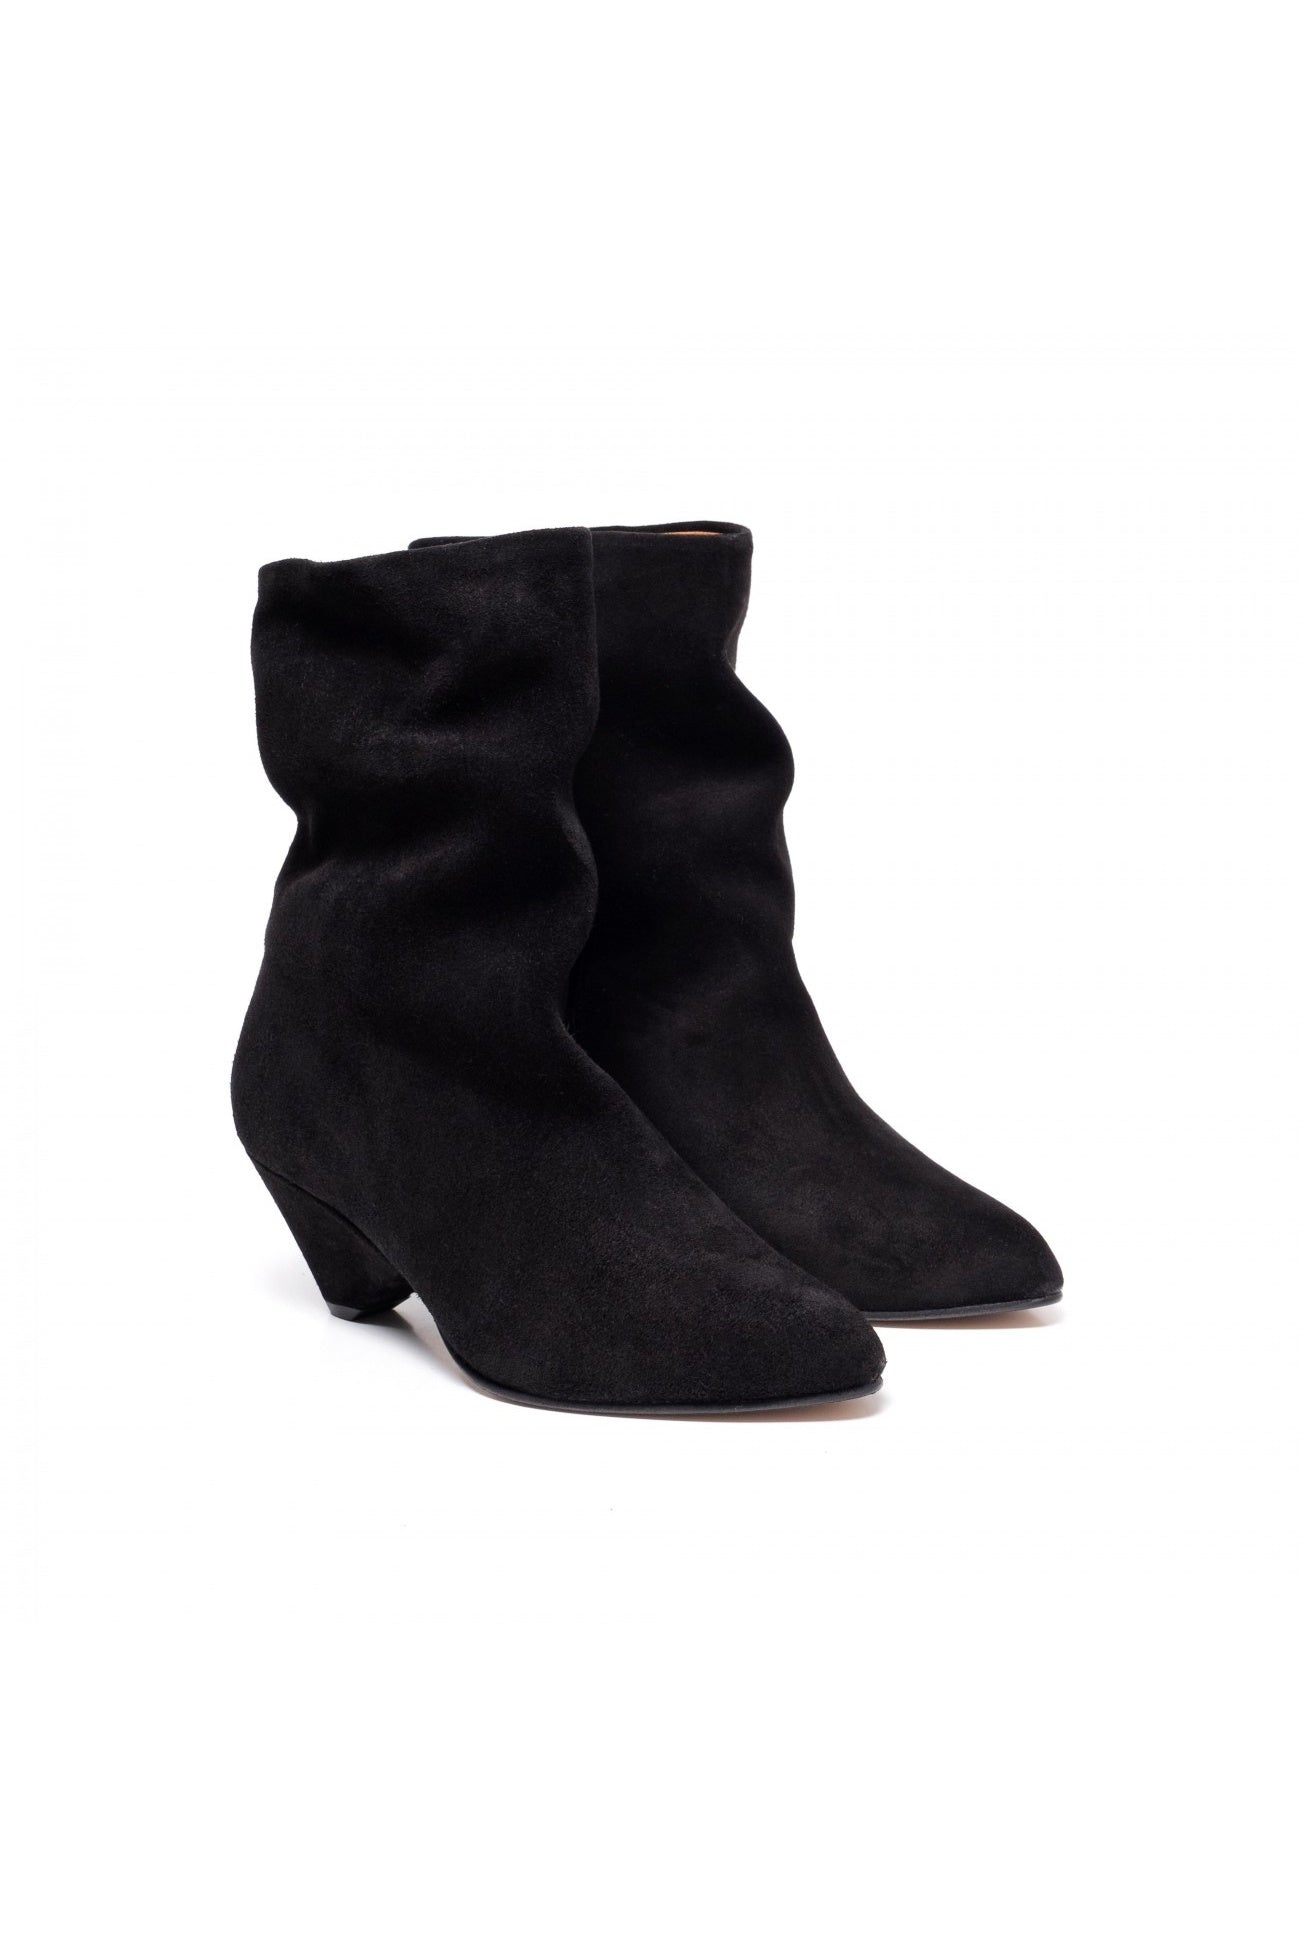 Vully 50 Triangle Calf Suede Boot - Black